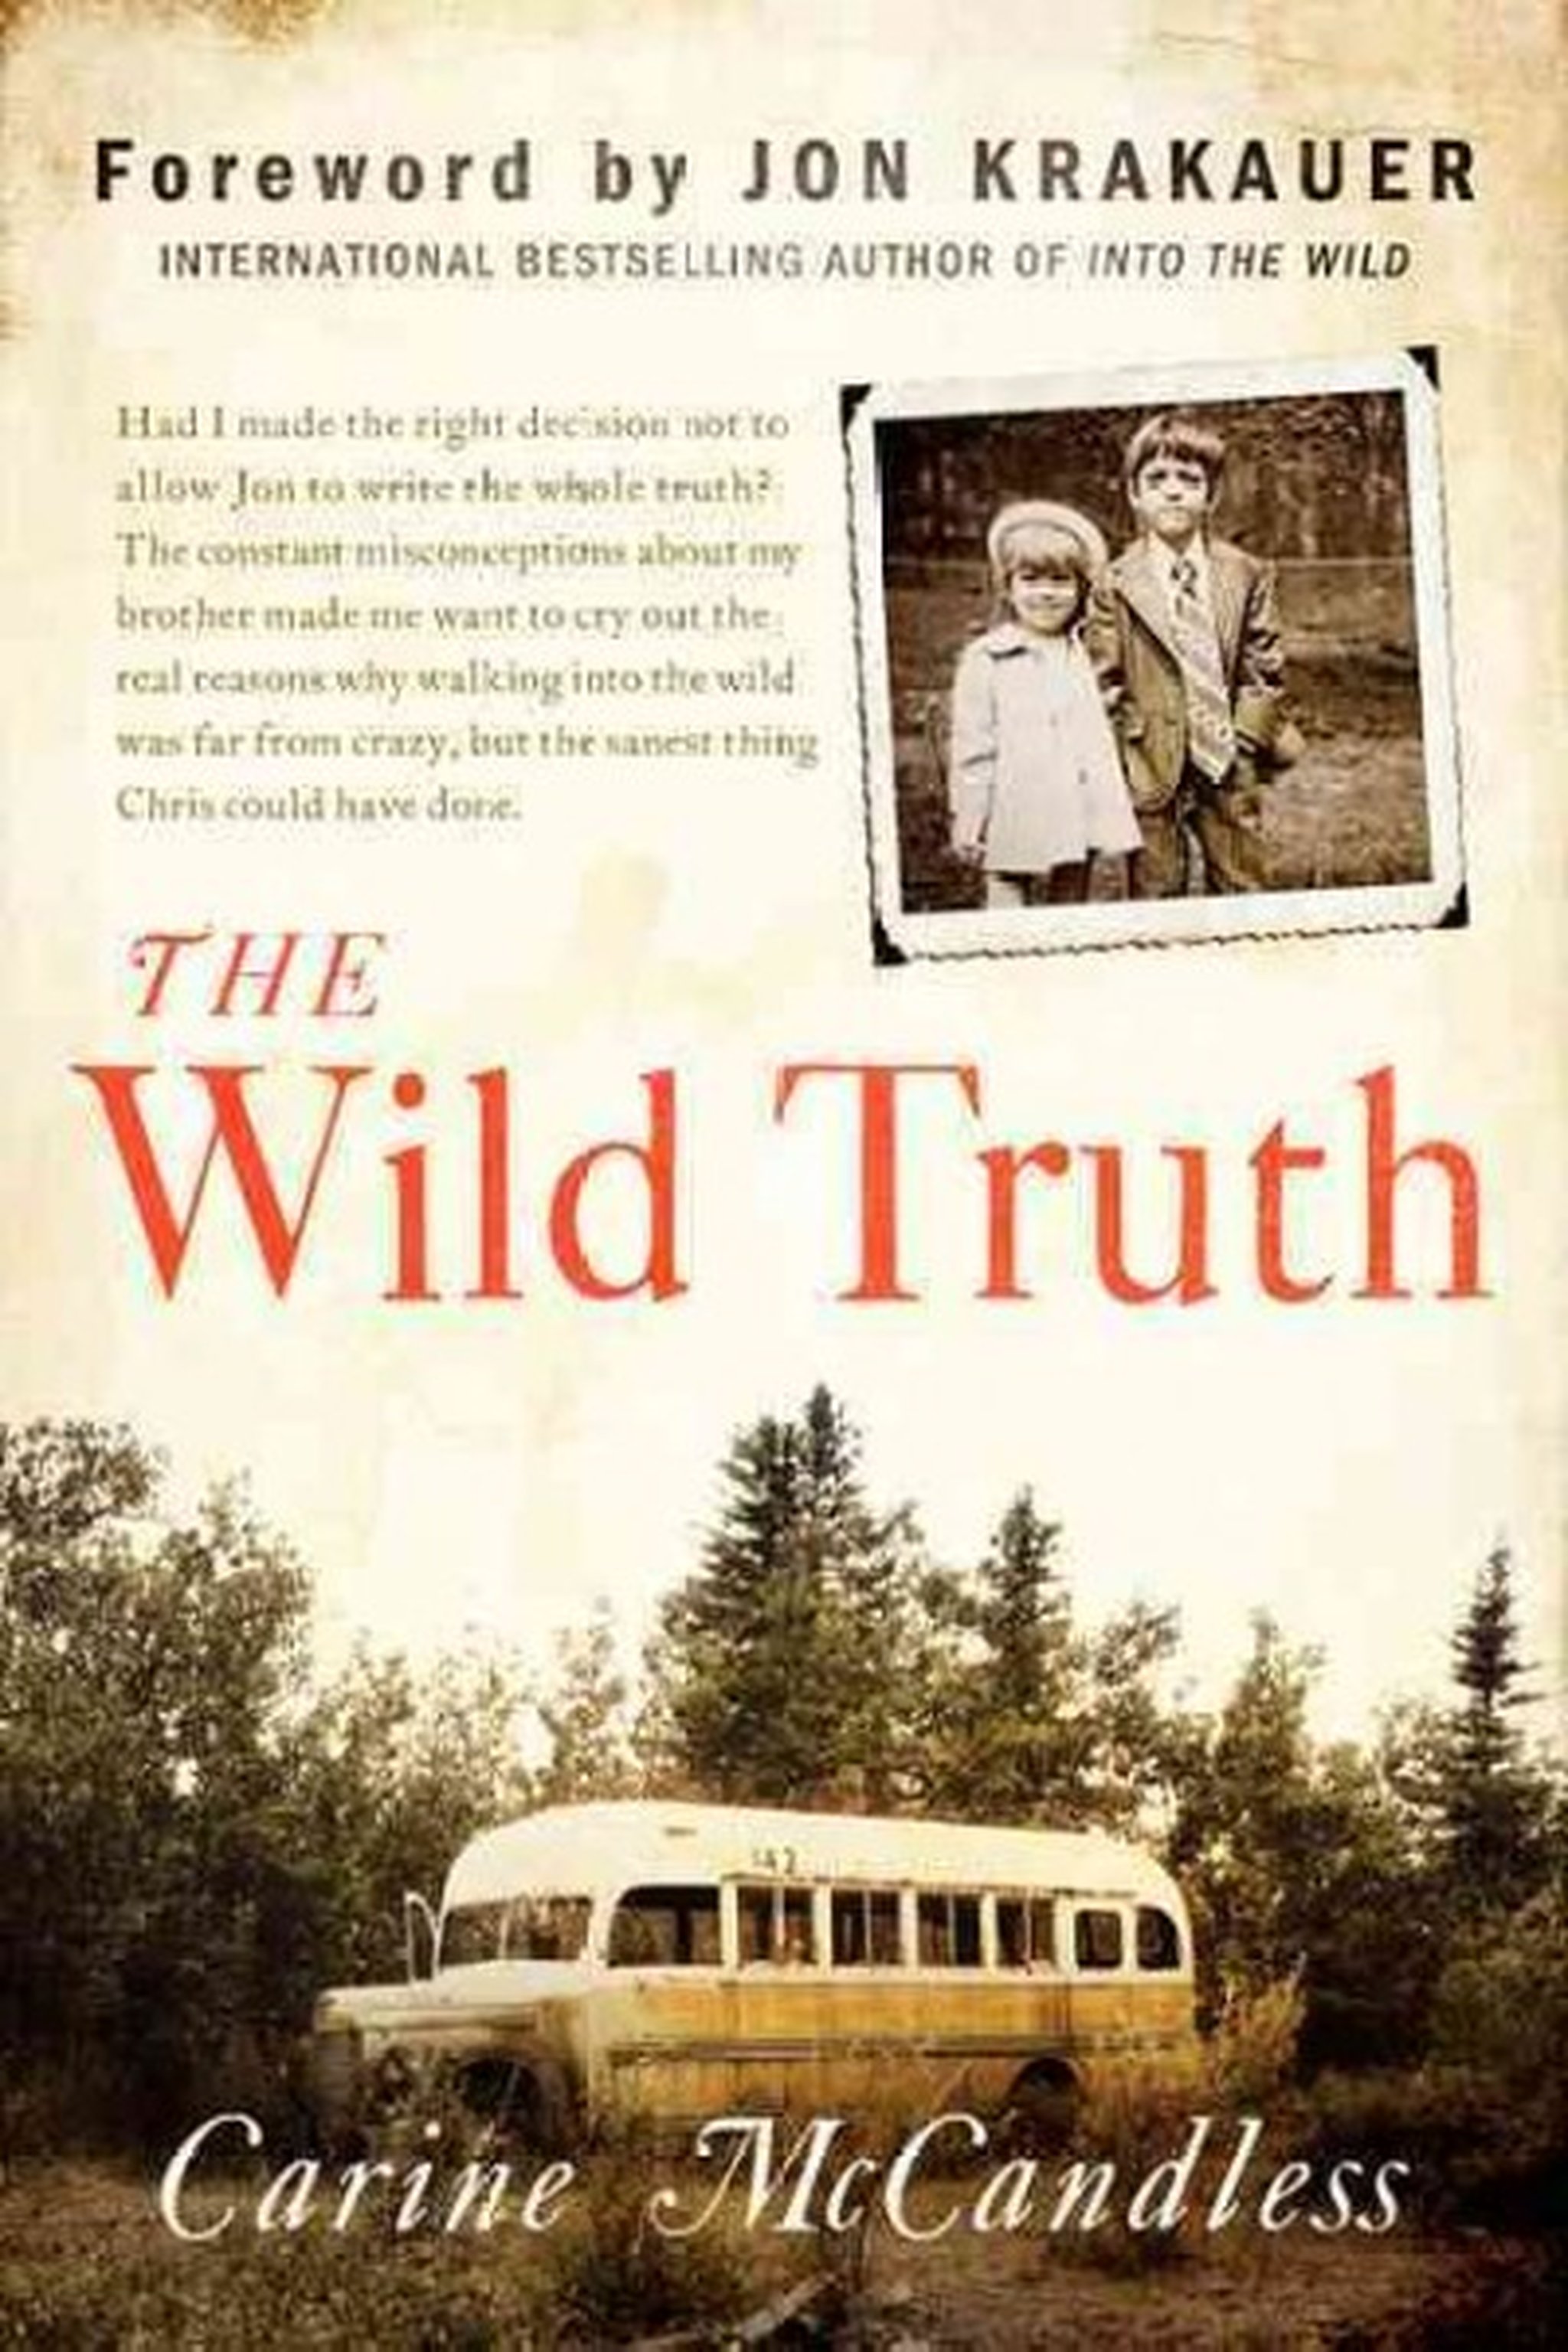 The Wild Truth by Carine McCandless | The Road